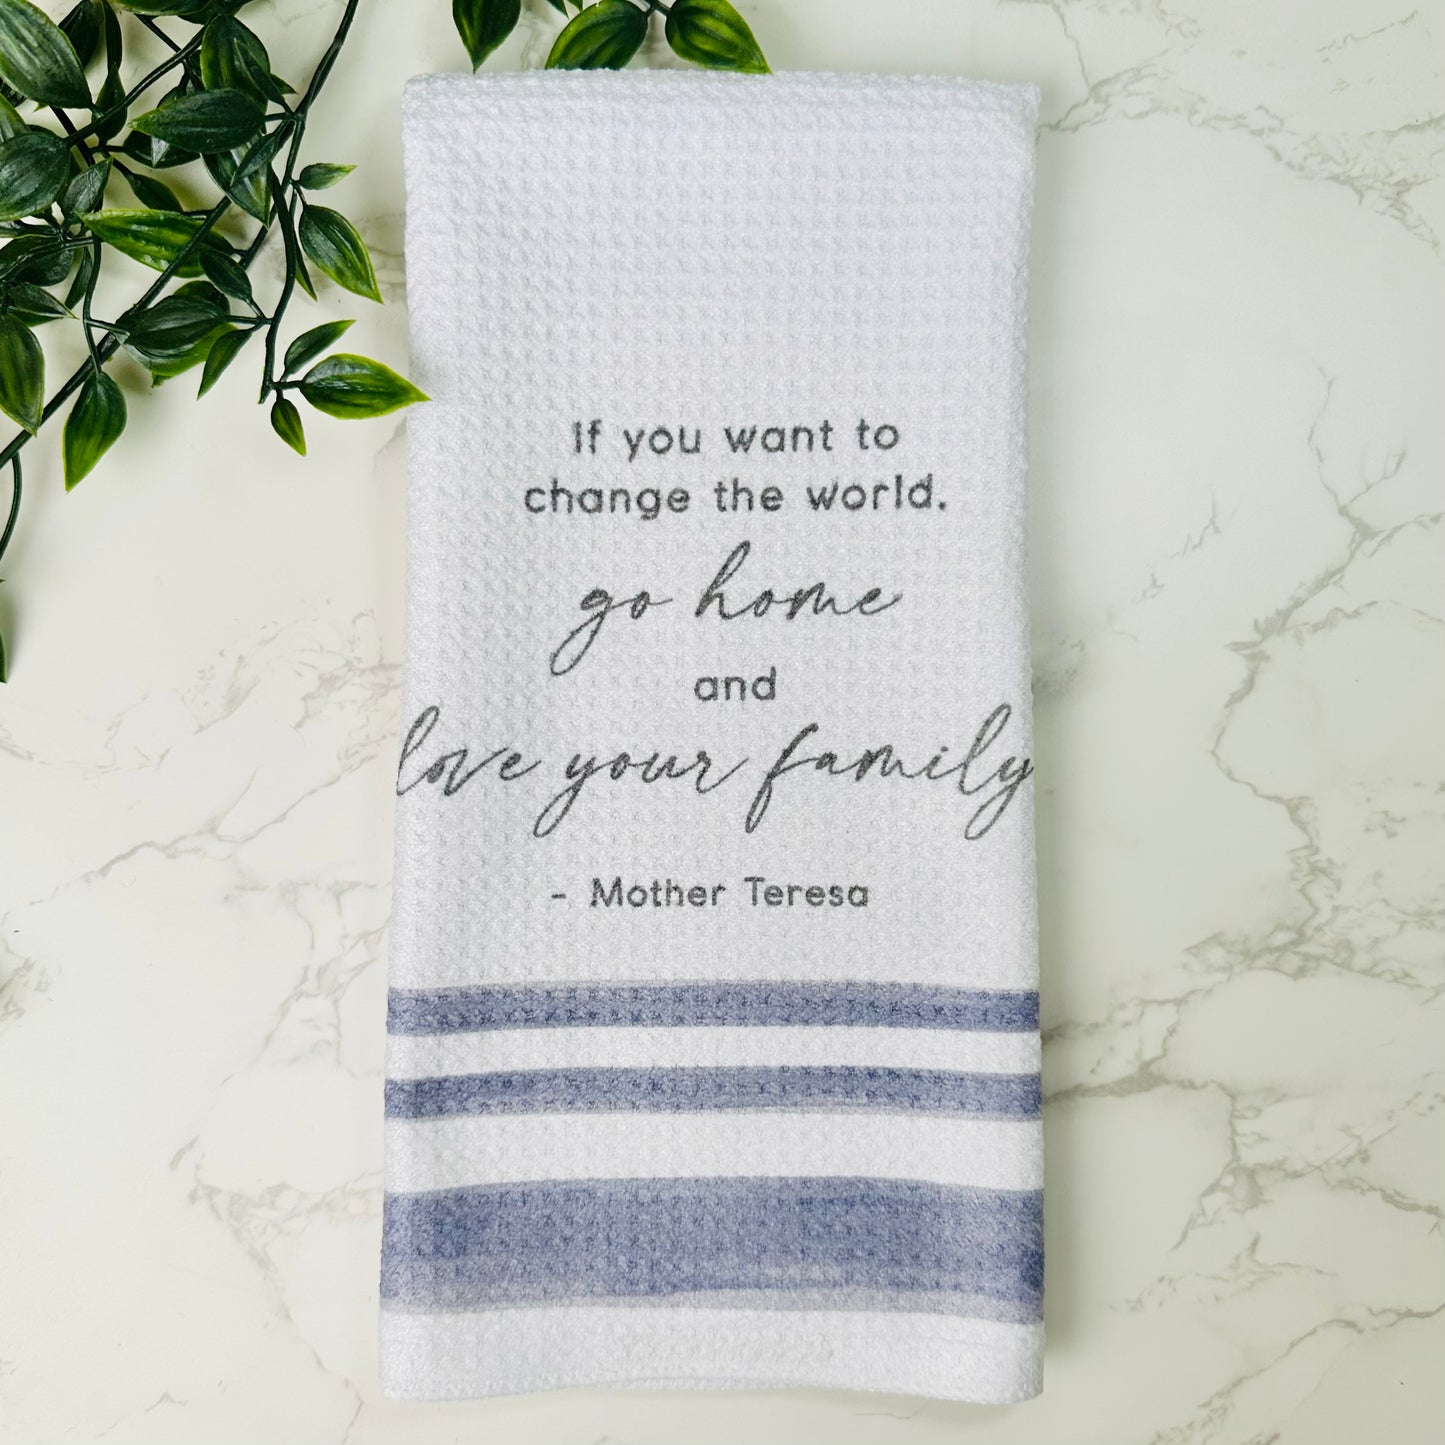 Go Home and Love Your Family Tea Towel